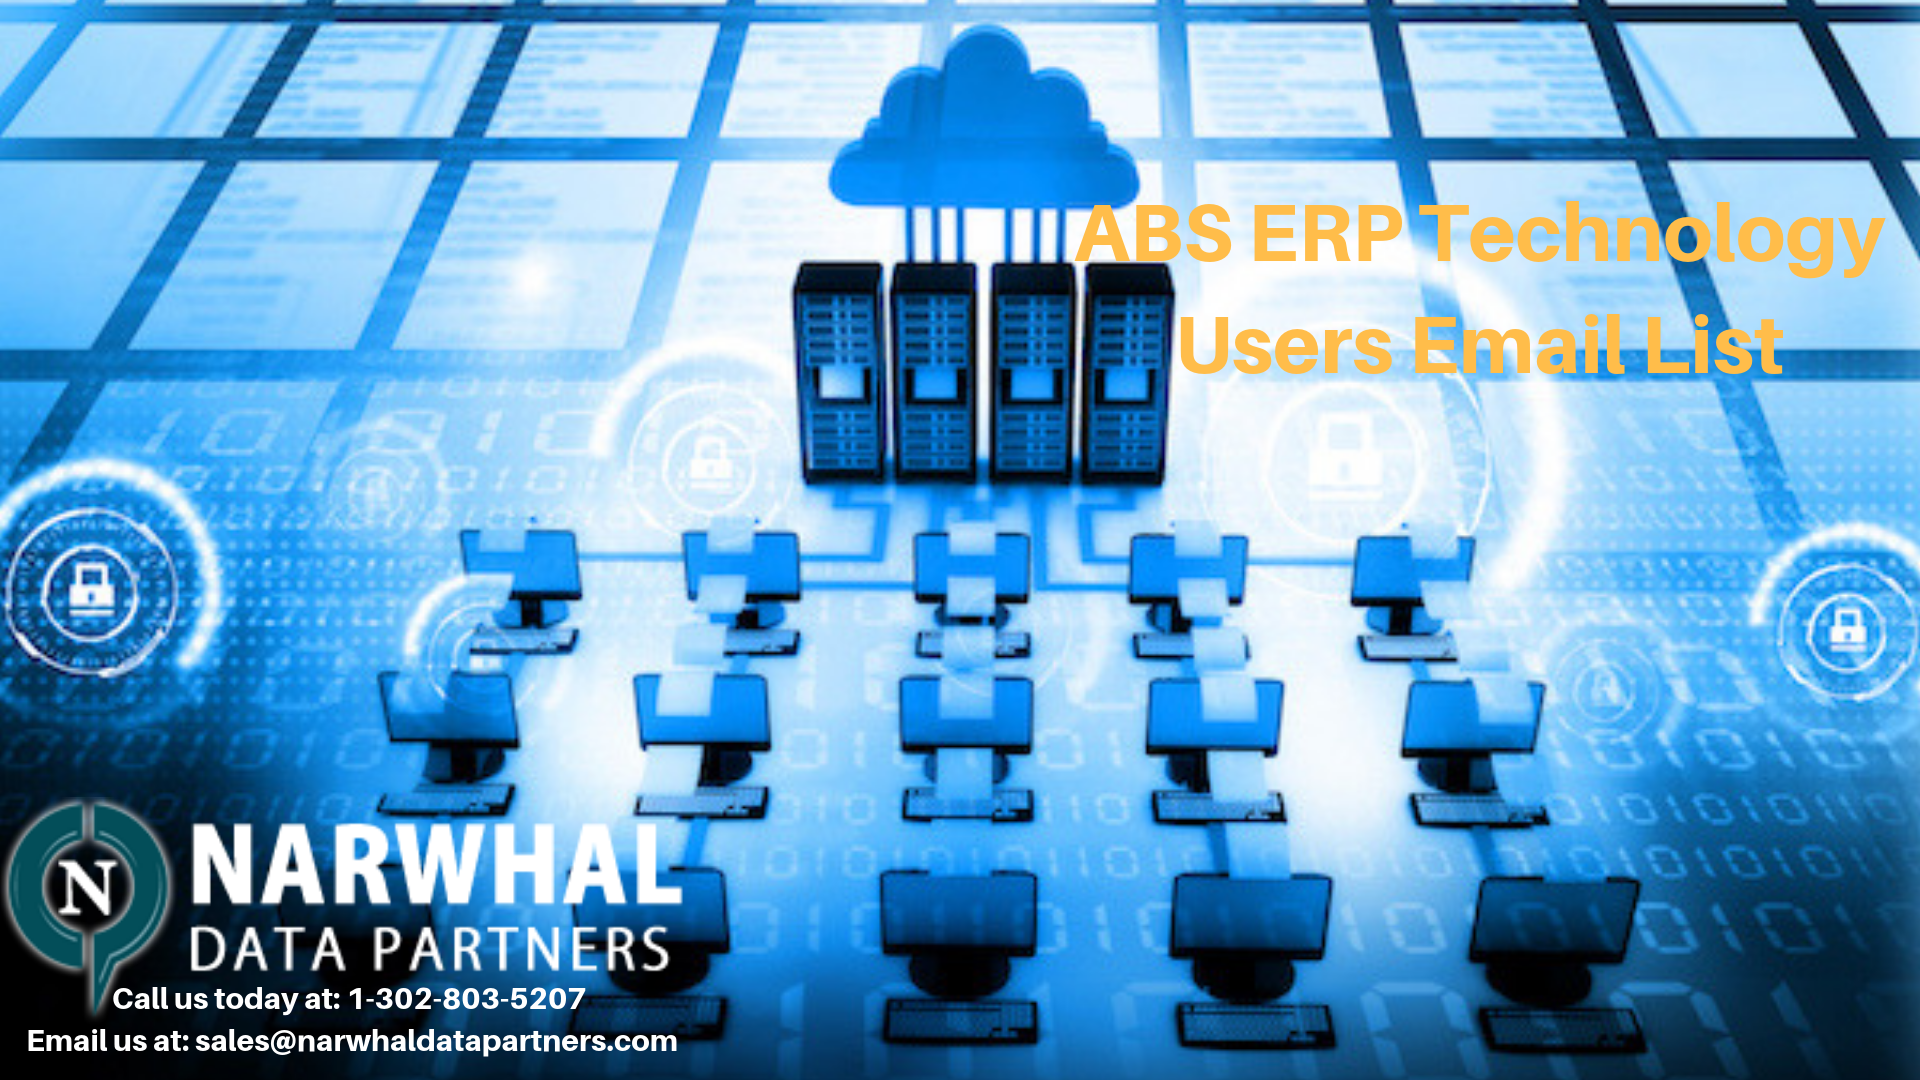 http://narwhaldatapartners.com/abs-erp-technology-users-email-list.html